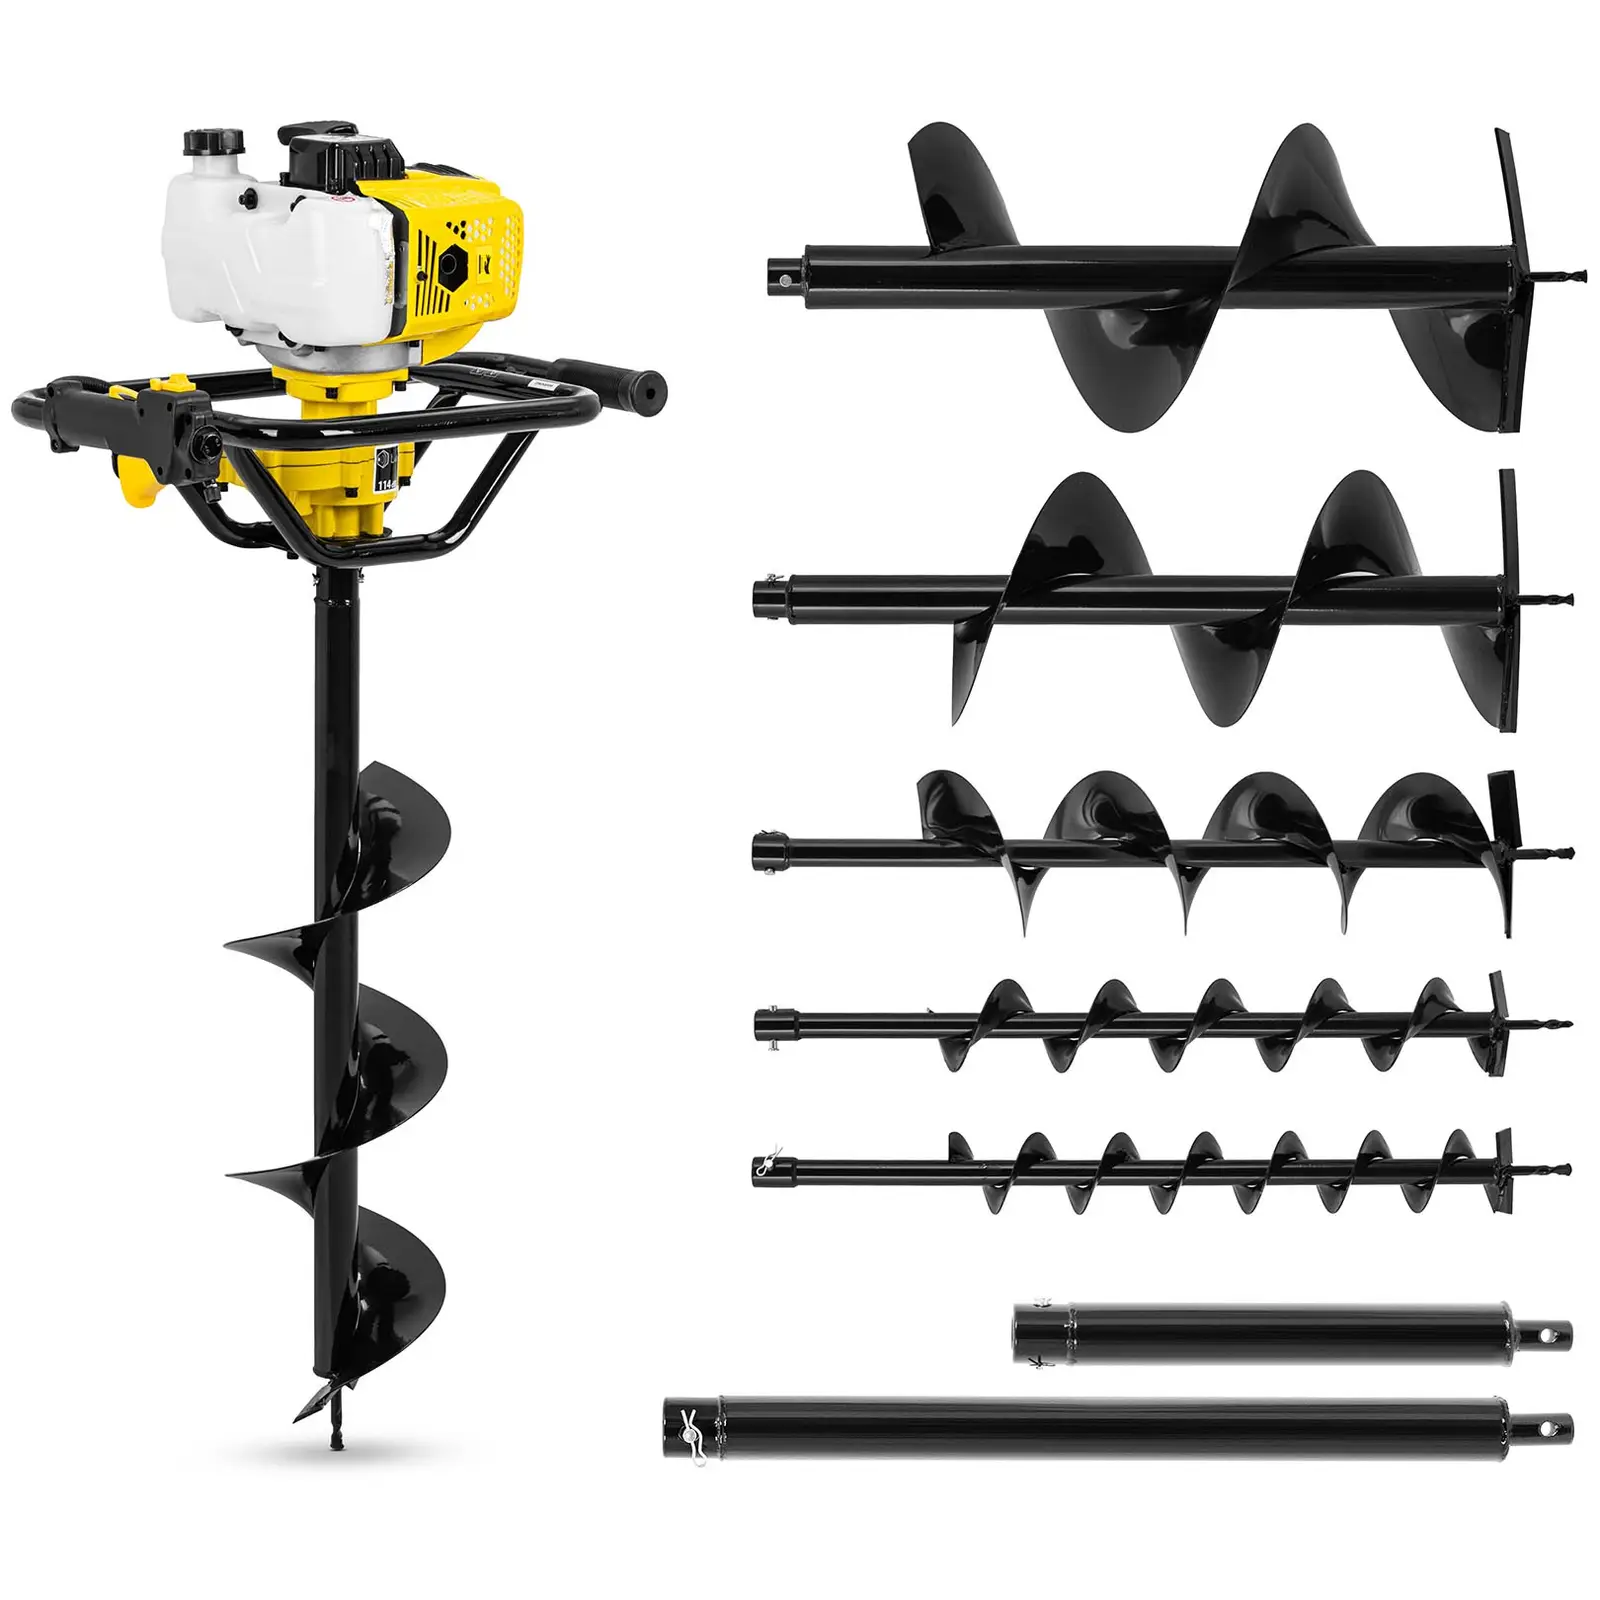 Auger set - 2.3 kW - incl. 6 augers and 2 extensions